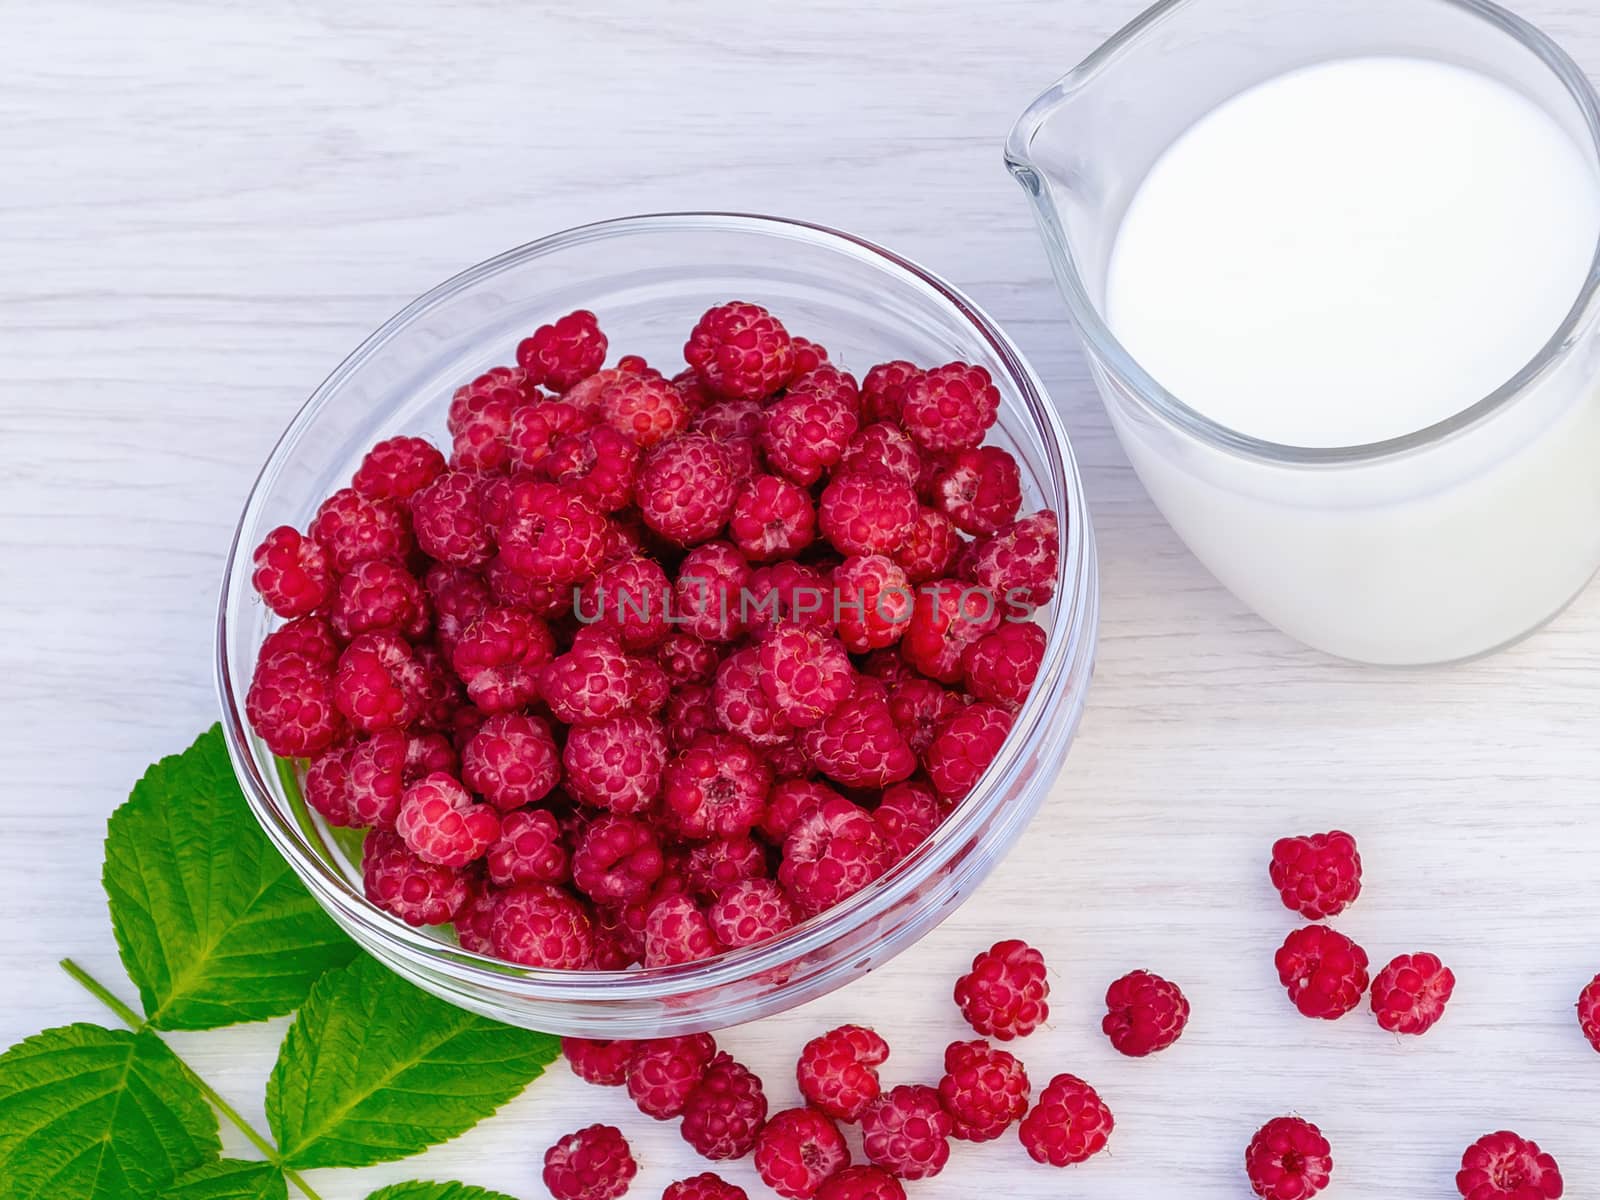 Fresh raspberries in a glass bowl and natural iogurt on a white wooden table. Healthy eating concept.